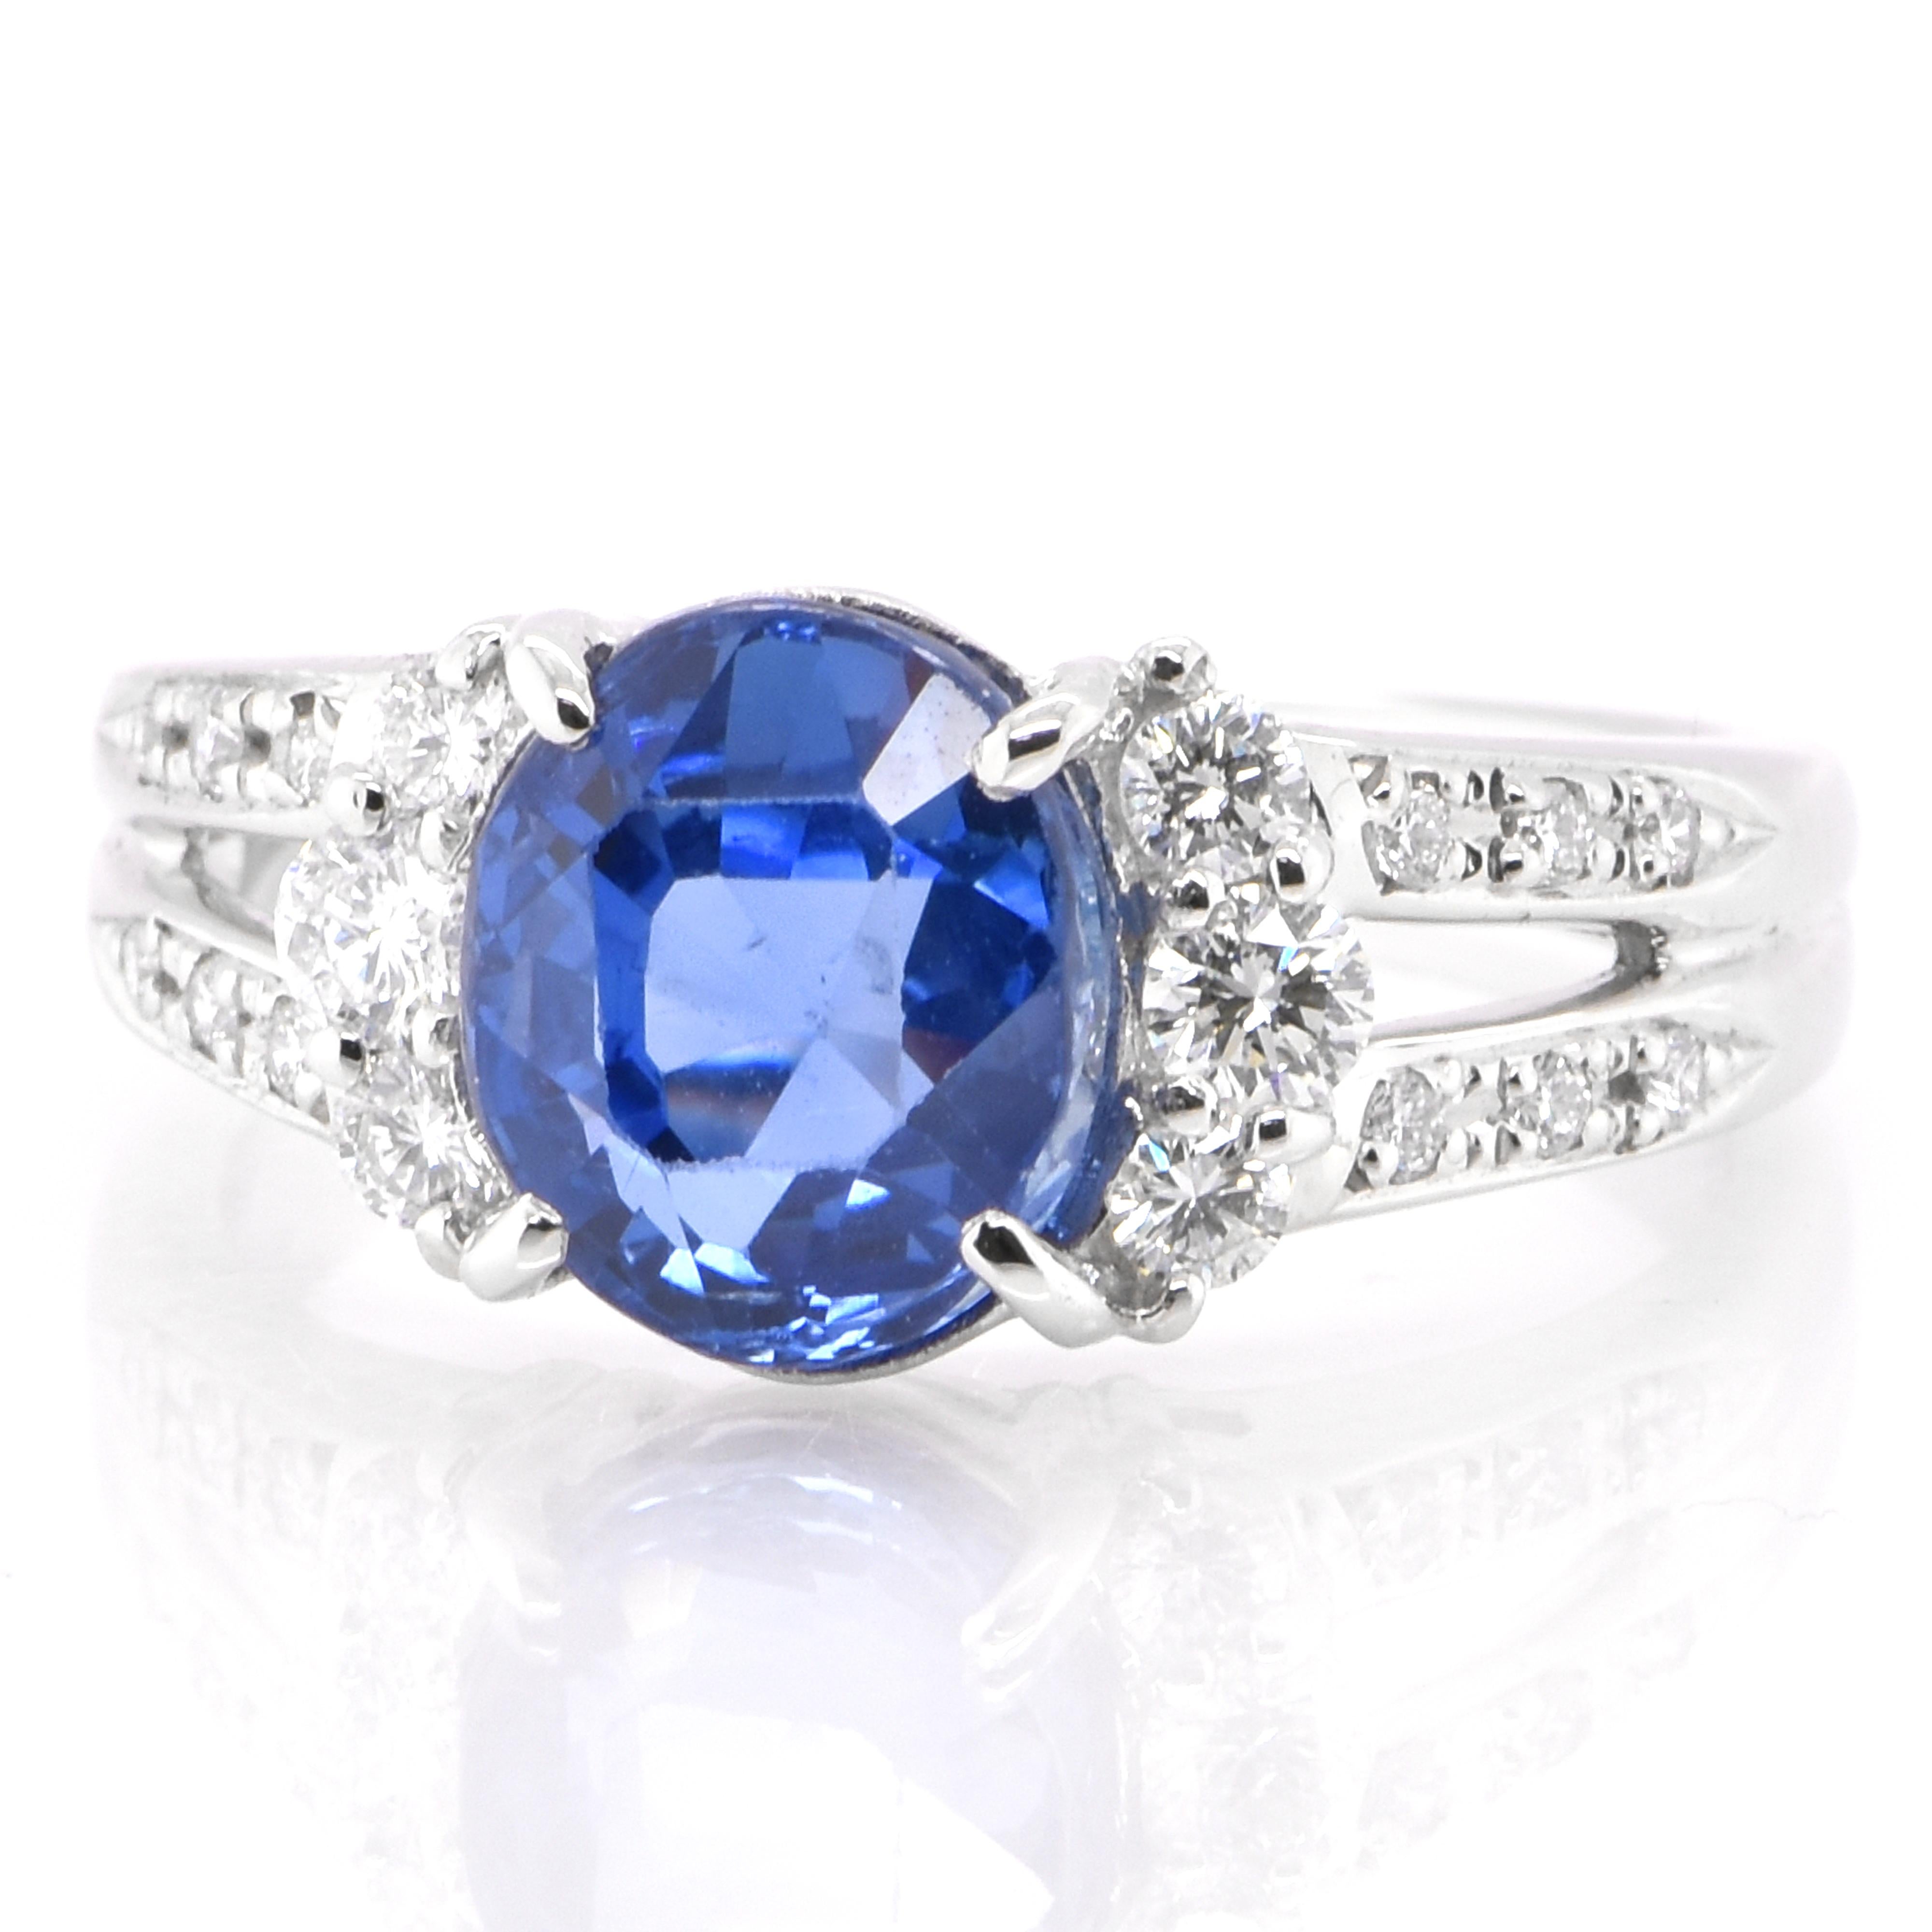 A beautiful ring featuring GIA Certified 3.33 Carat Natural Burmese, Unheated Sapphire and 0.37 Carats Diamond Accents set in Platinum. Sapphires have extraordinary durability - they excel in hardness as well as toughness and durability making them